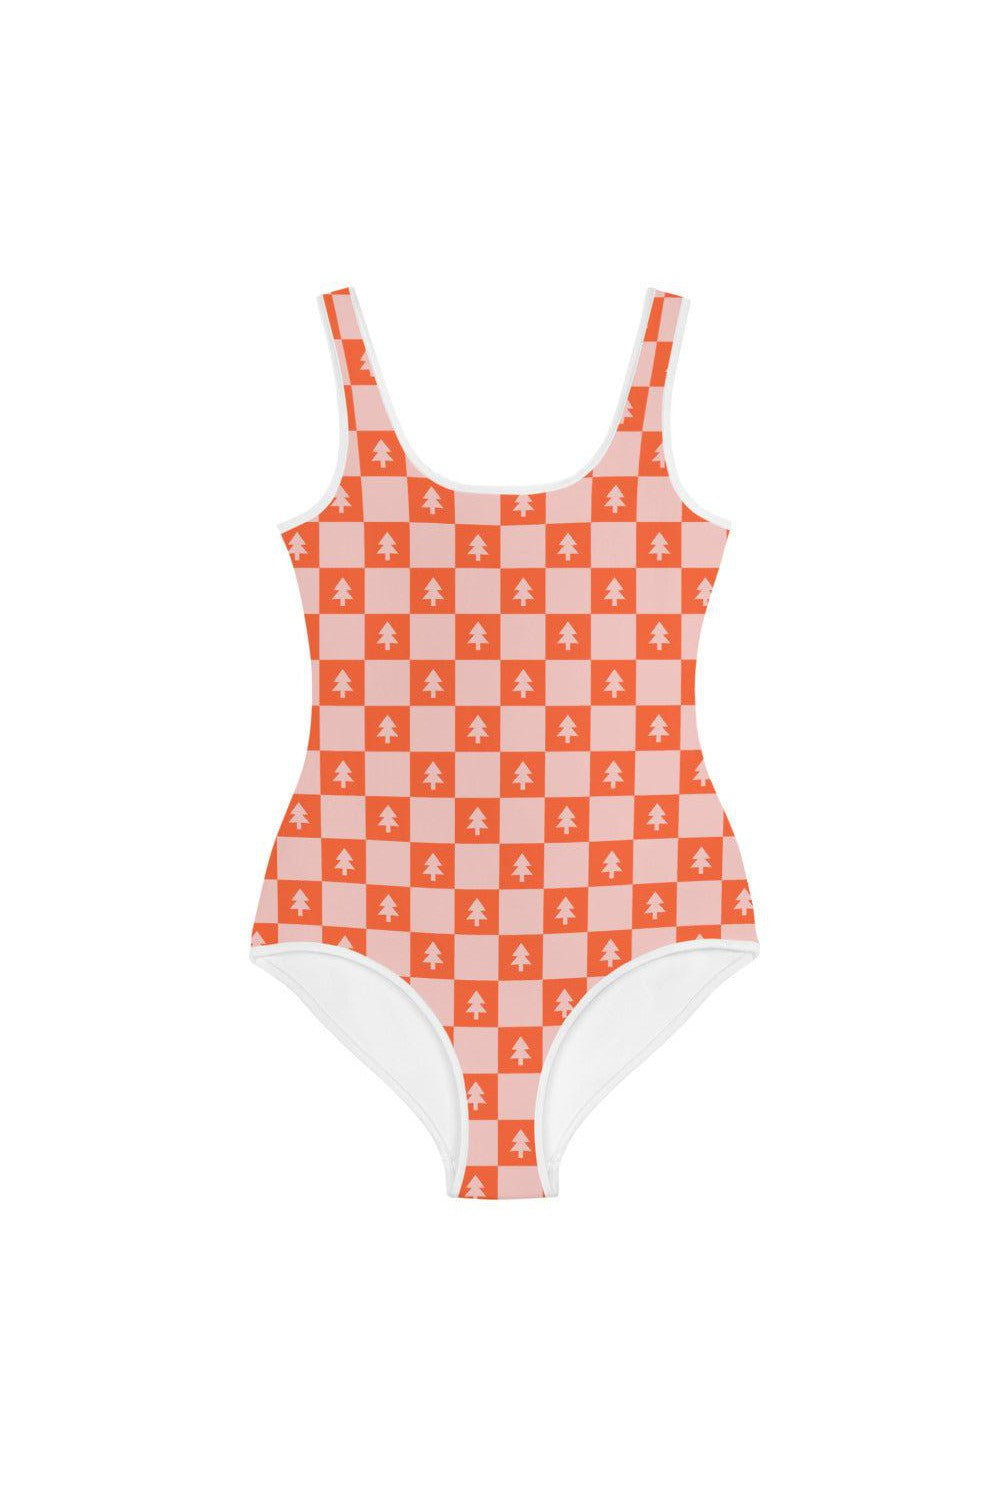 Holiday Check Youth Swimsuit/Leotard - Mack & Harvie